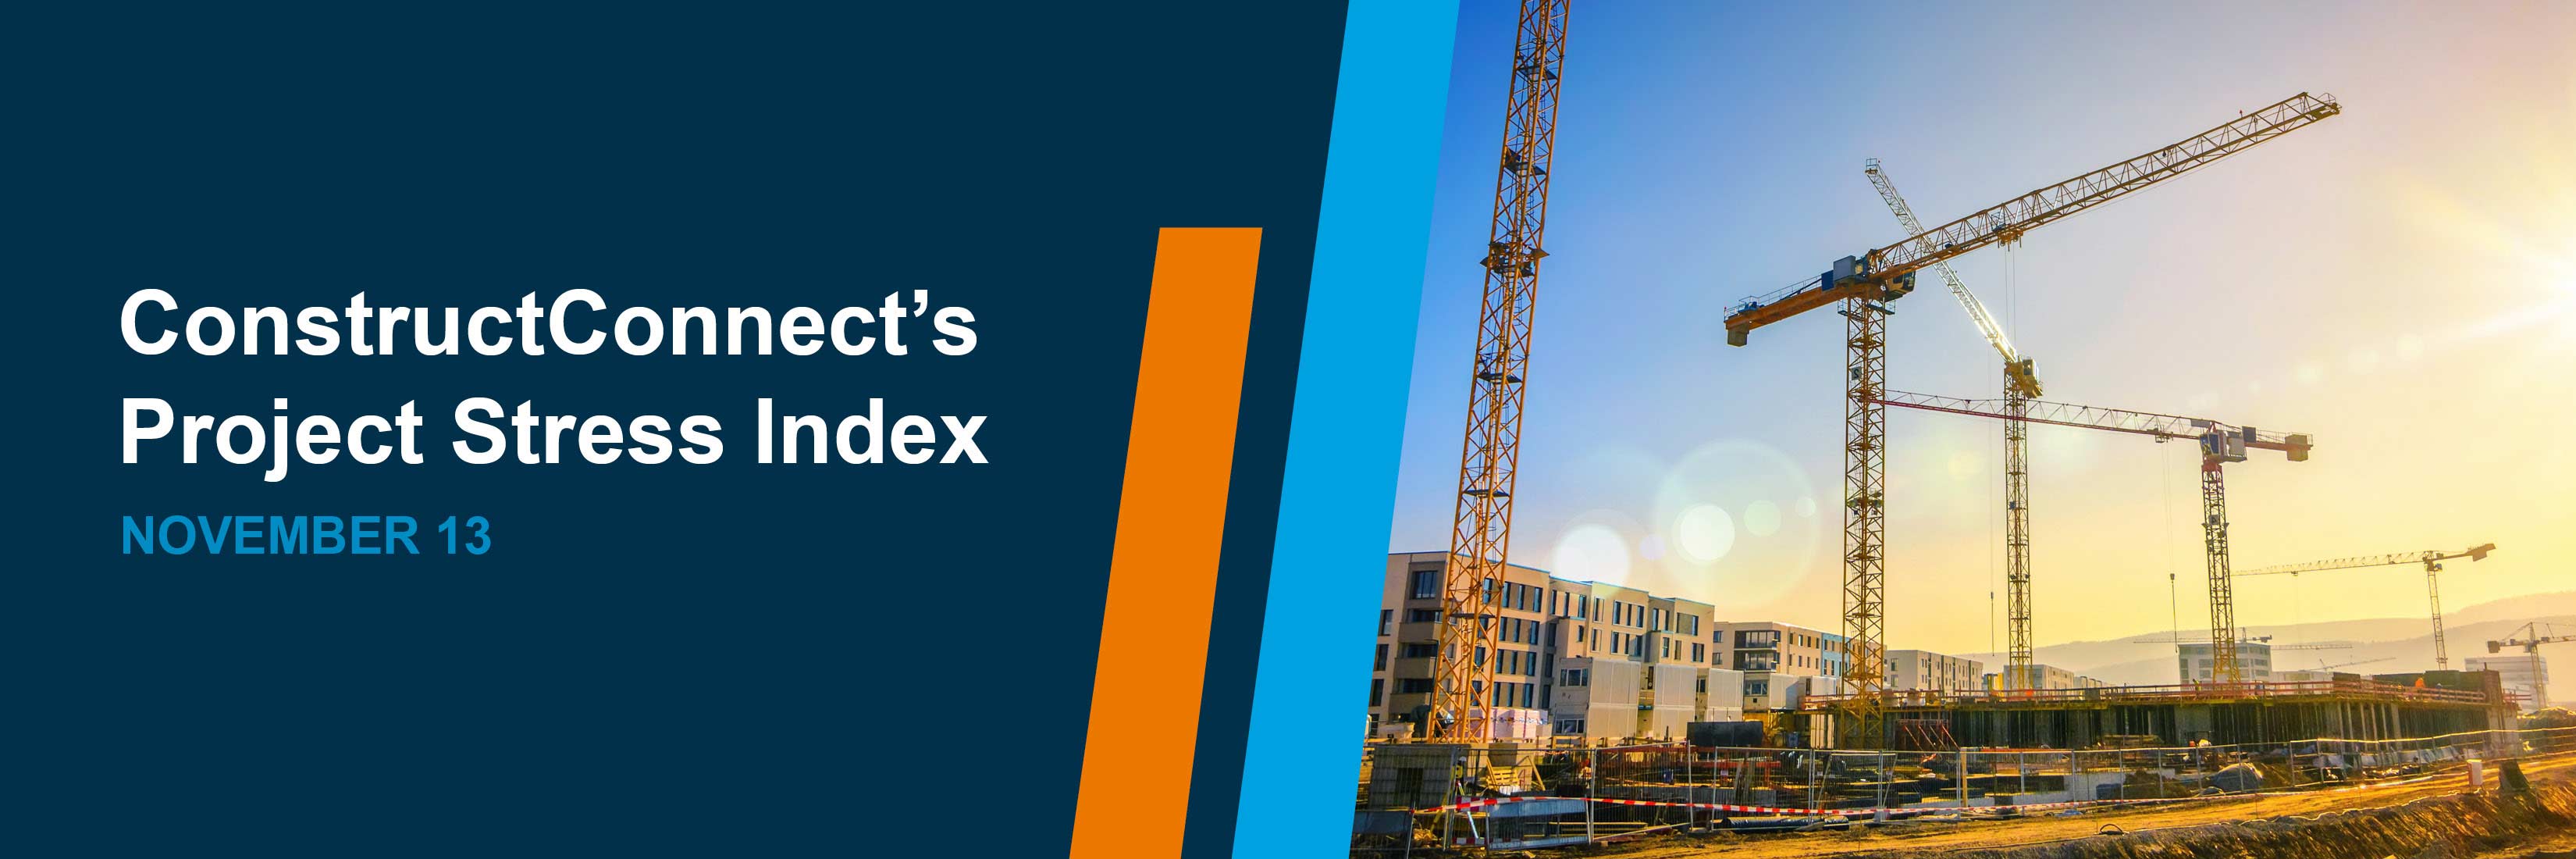 ConstructConnect's Project Stress Index - November 13